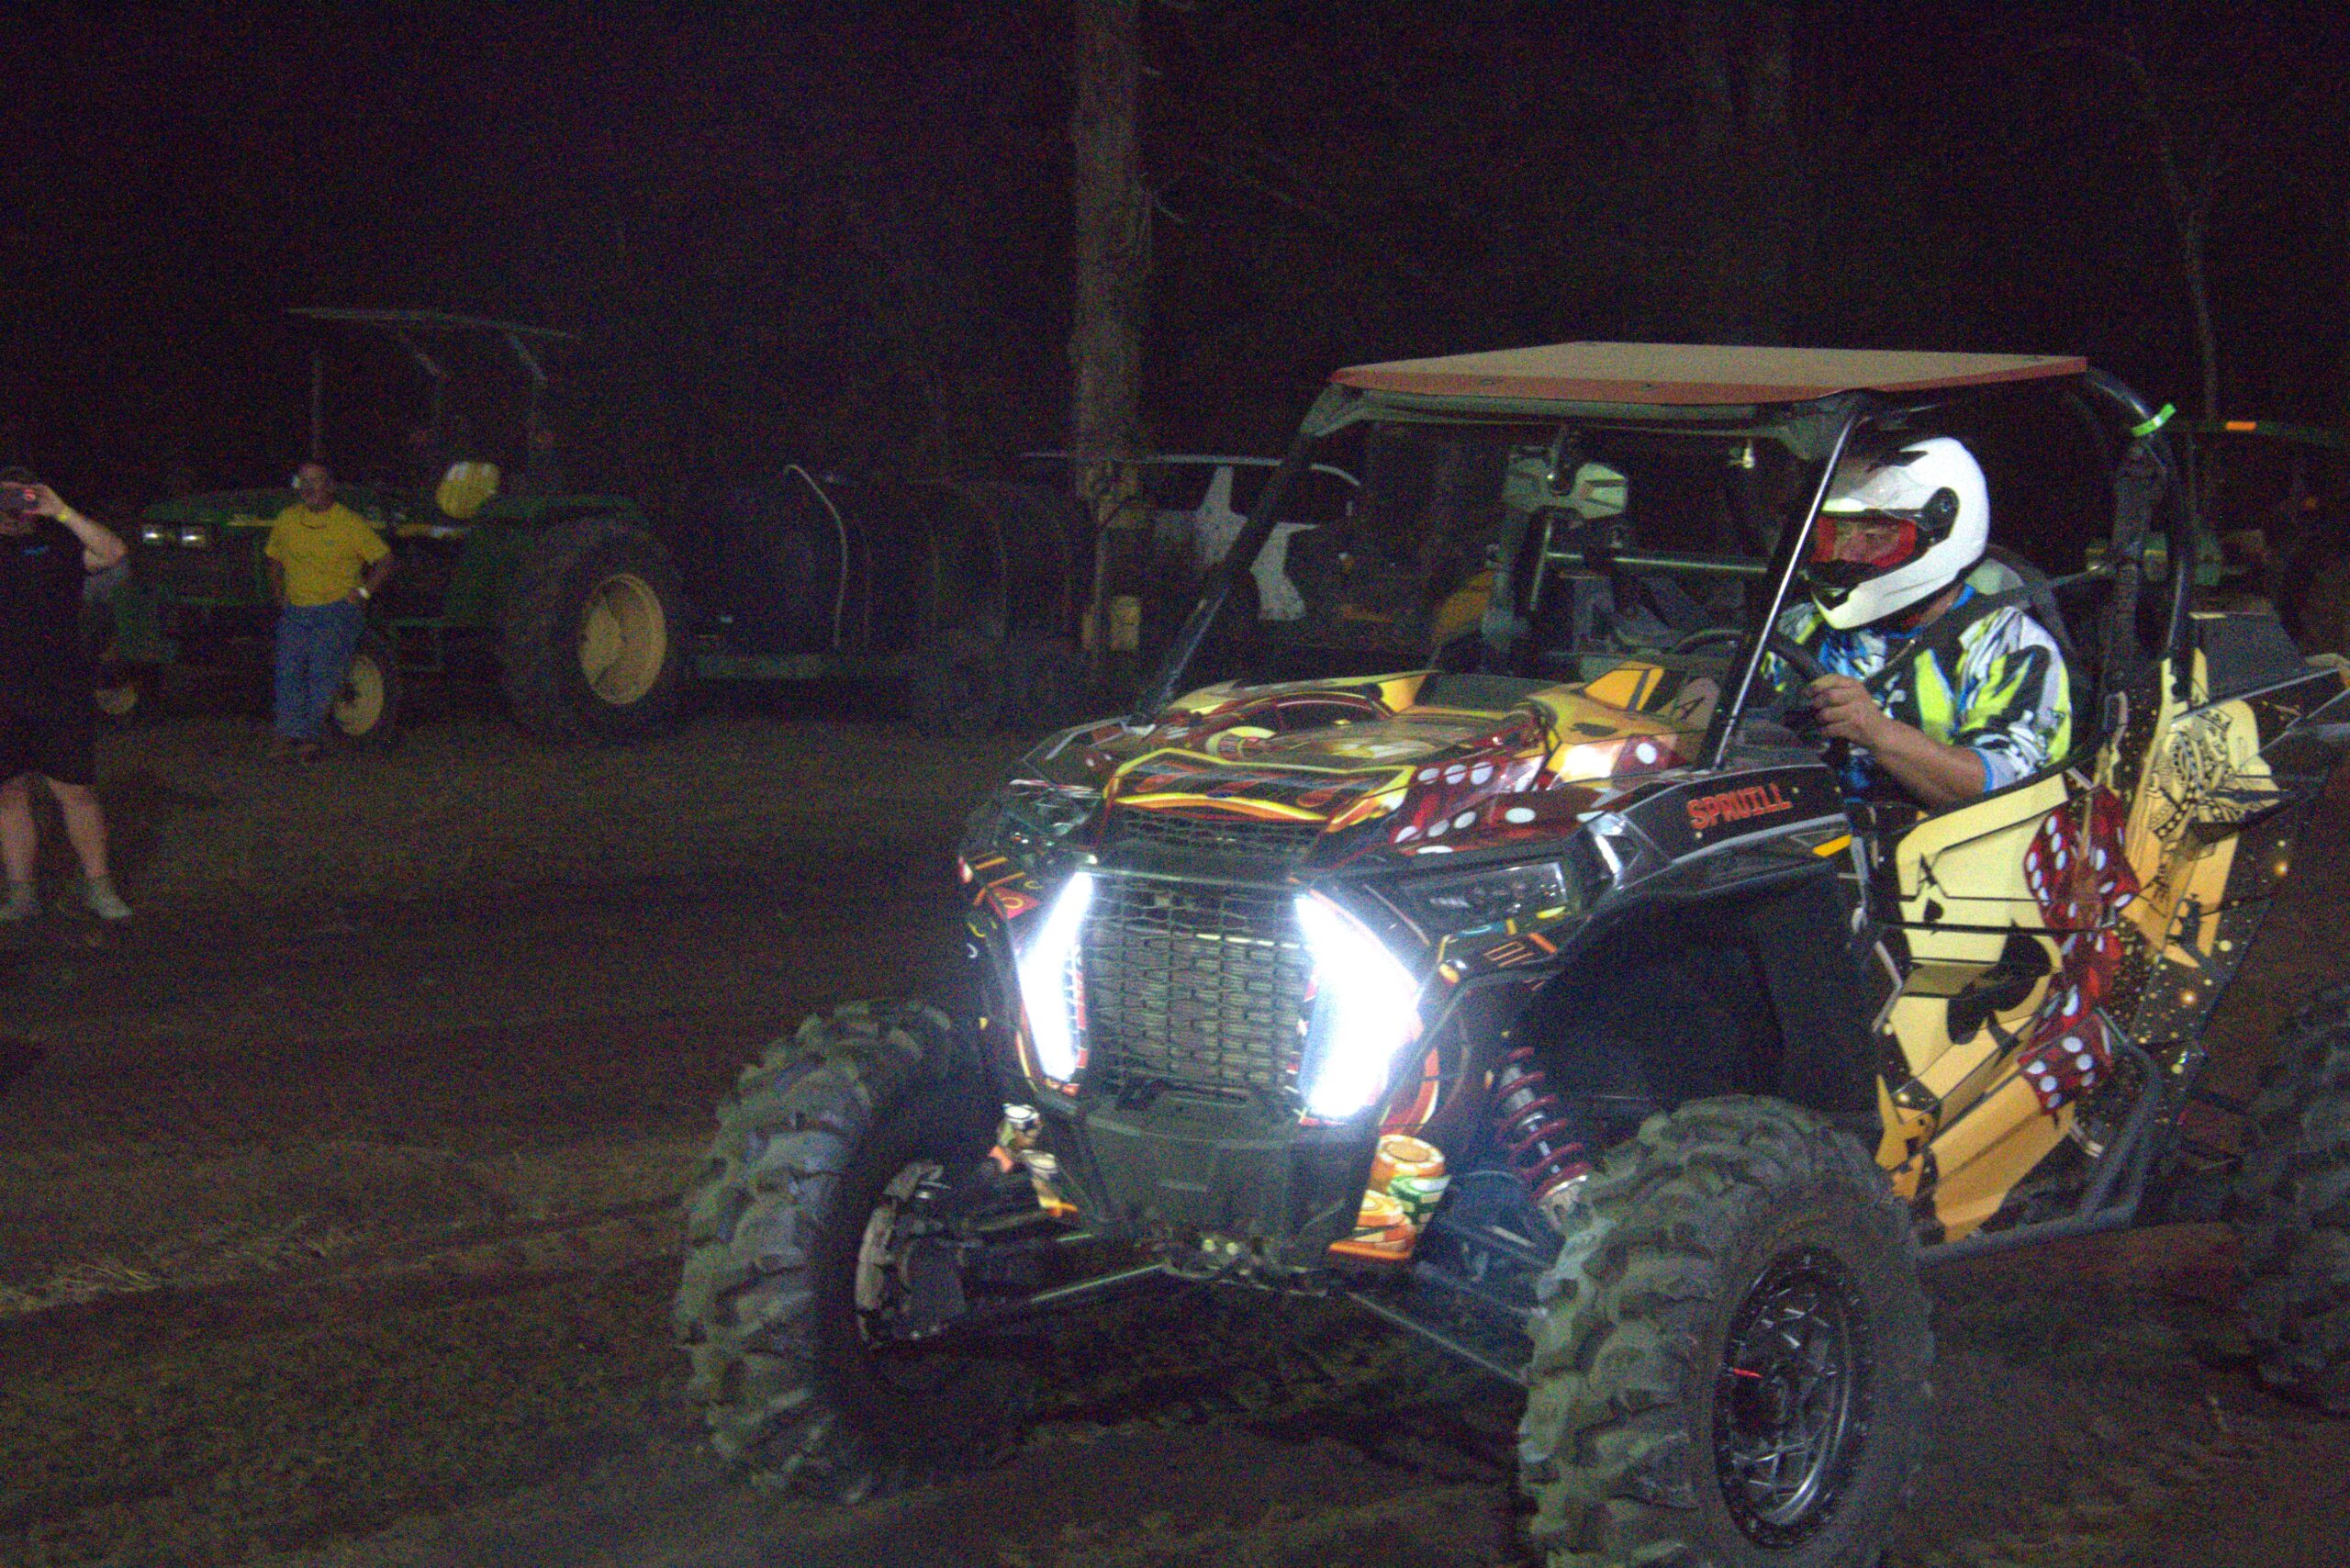 A man riding on the back of an atv at night.